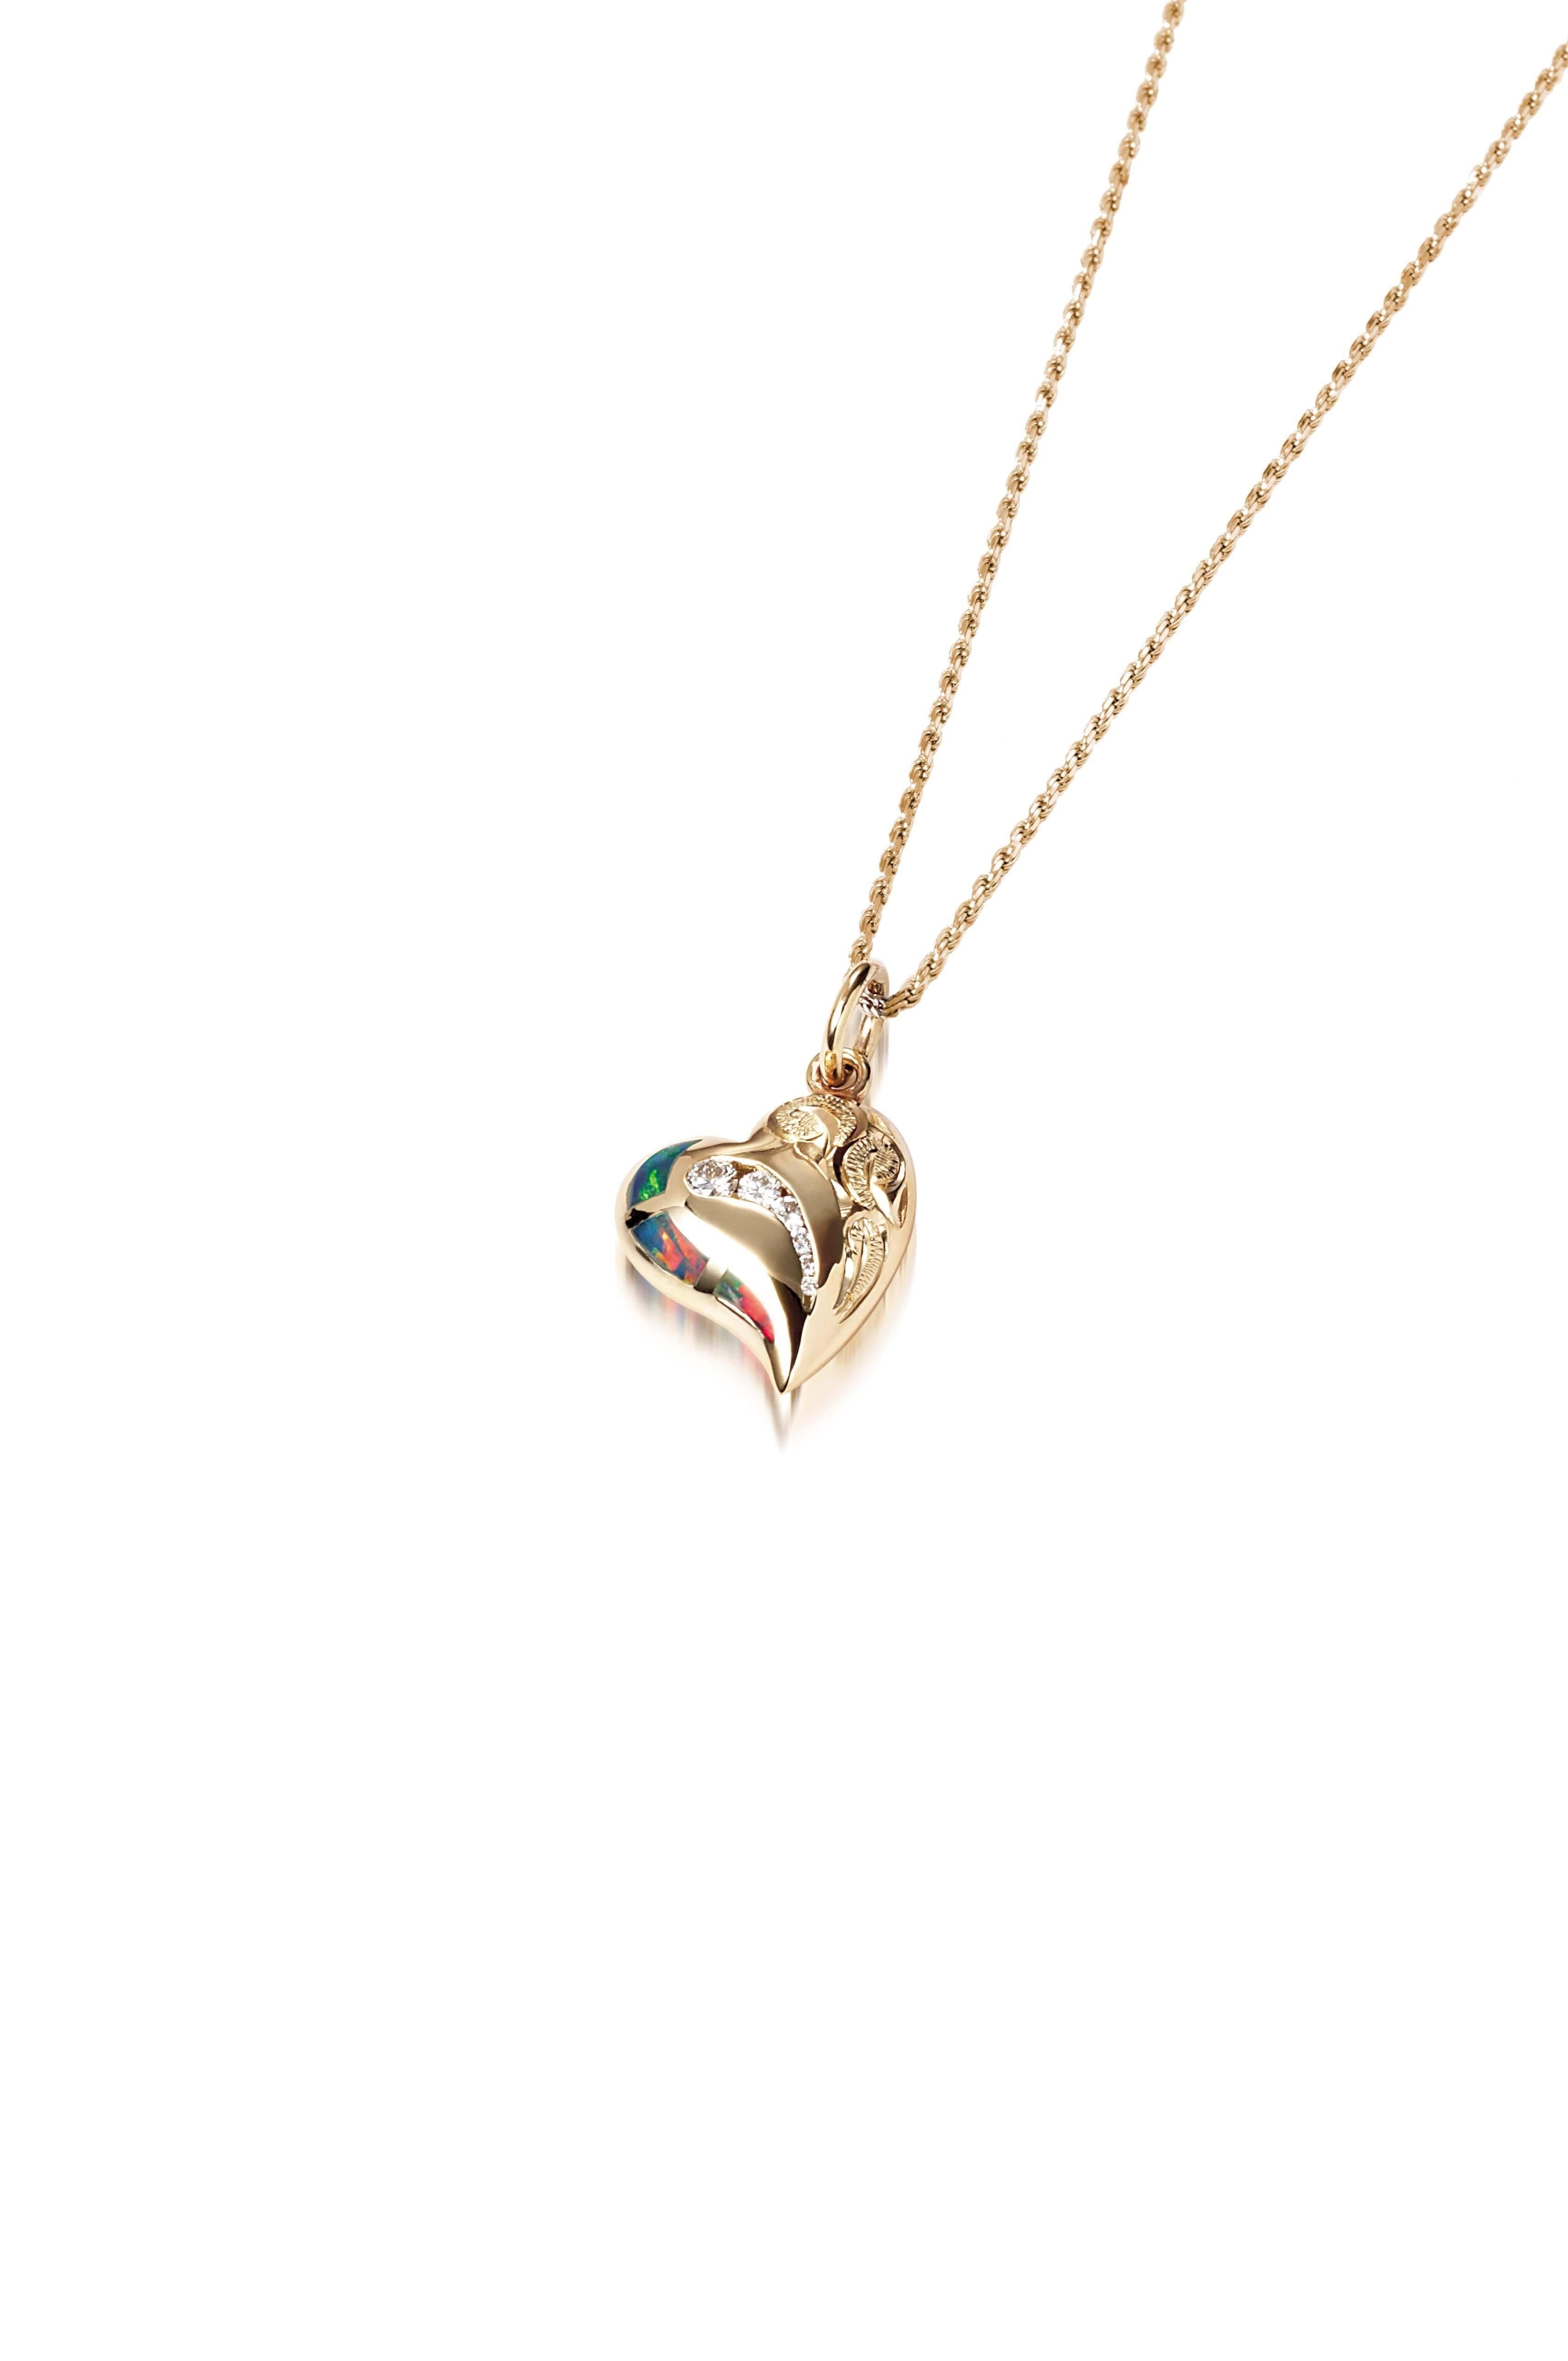 The picture shows a 14K yellow gold opal heart pendant with hand engravings.